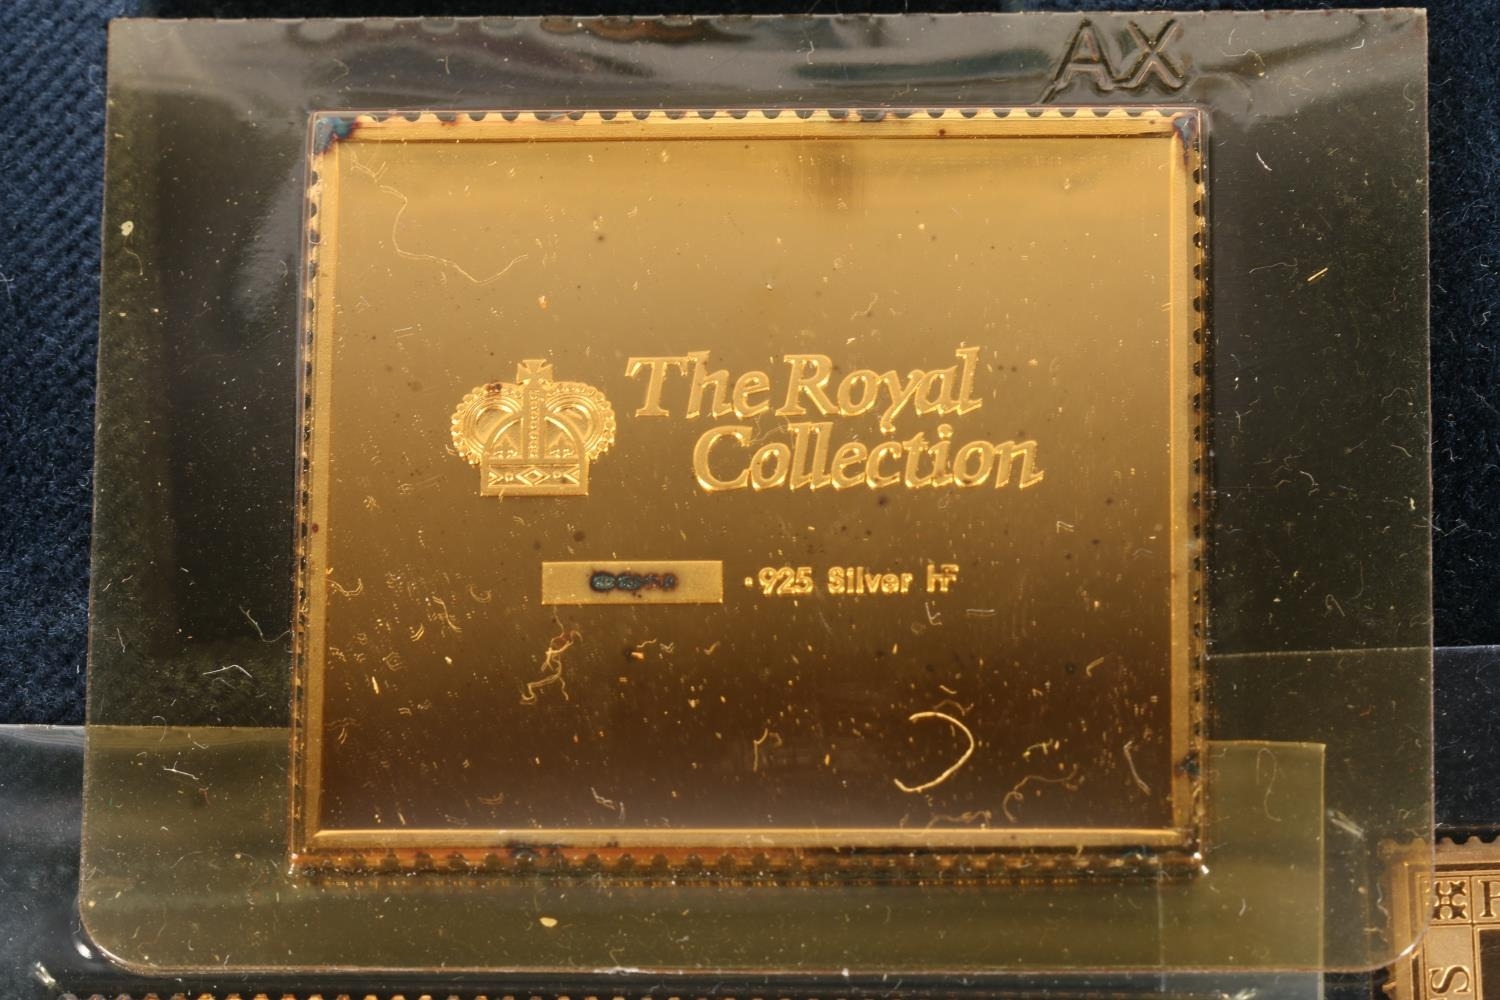 Hallmark Replicas Limited Treasures from the Royal Collection set of twenty-five silver gilt proof - Image 3 of 4